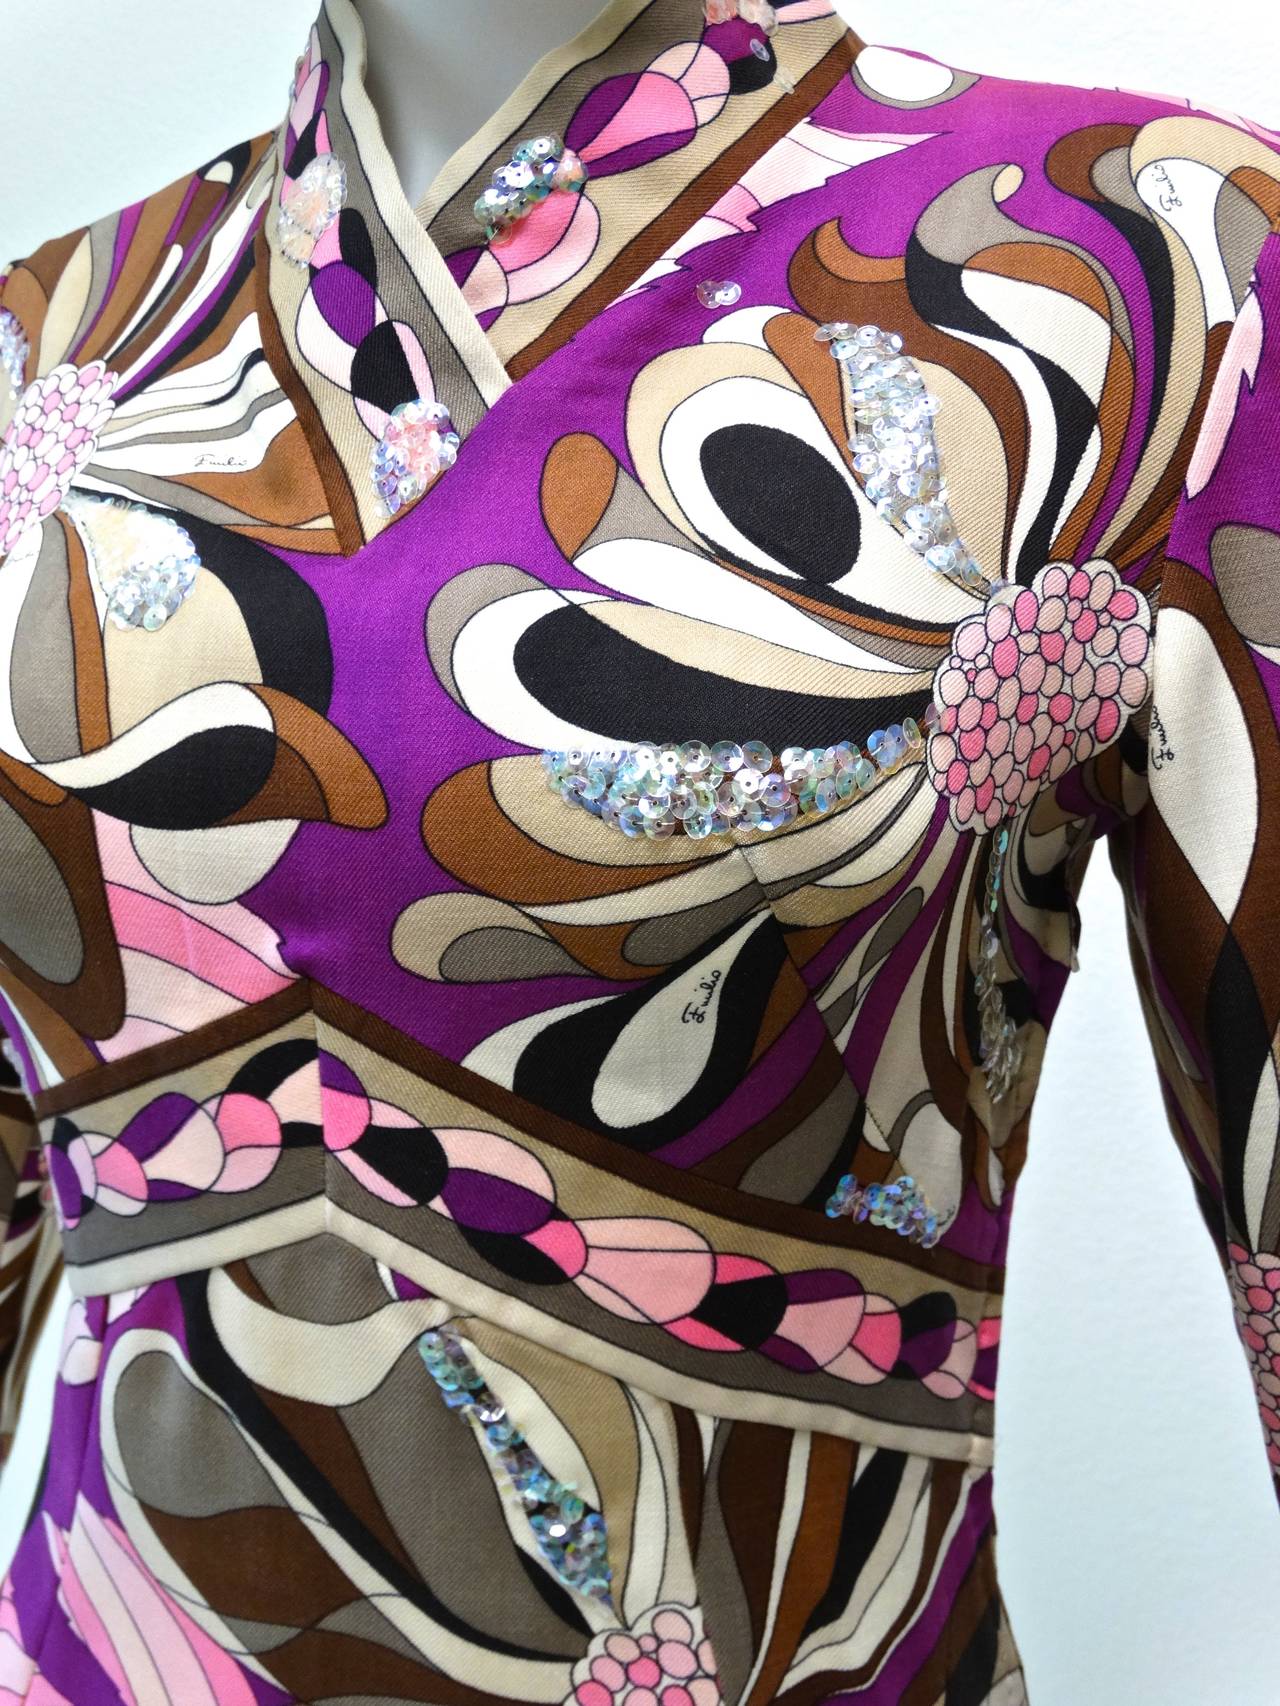 Fantastic 1960’s Pucci dress with iridescent sequins ( on the front only) is made from wool, printed with an iconic mod graphic in shades of violet, fuchsia, baby pink, dark brown, beige and white. This dress is constructed with so many details, it